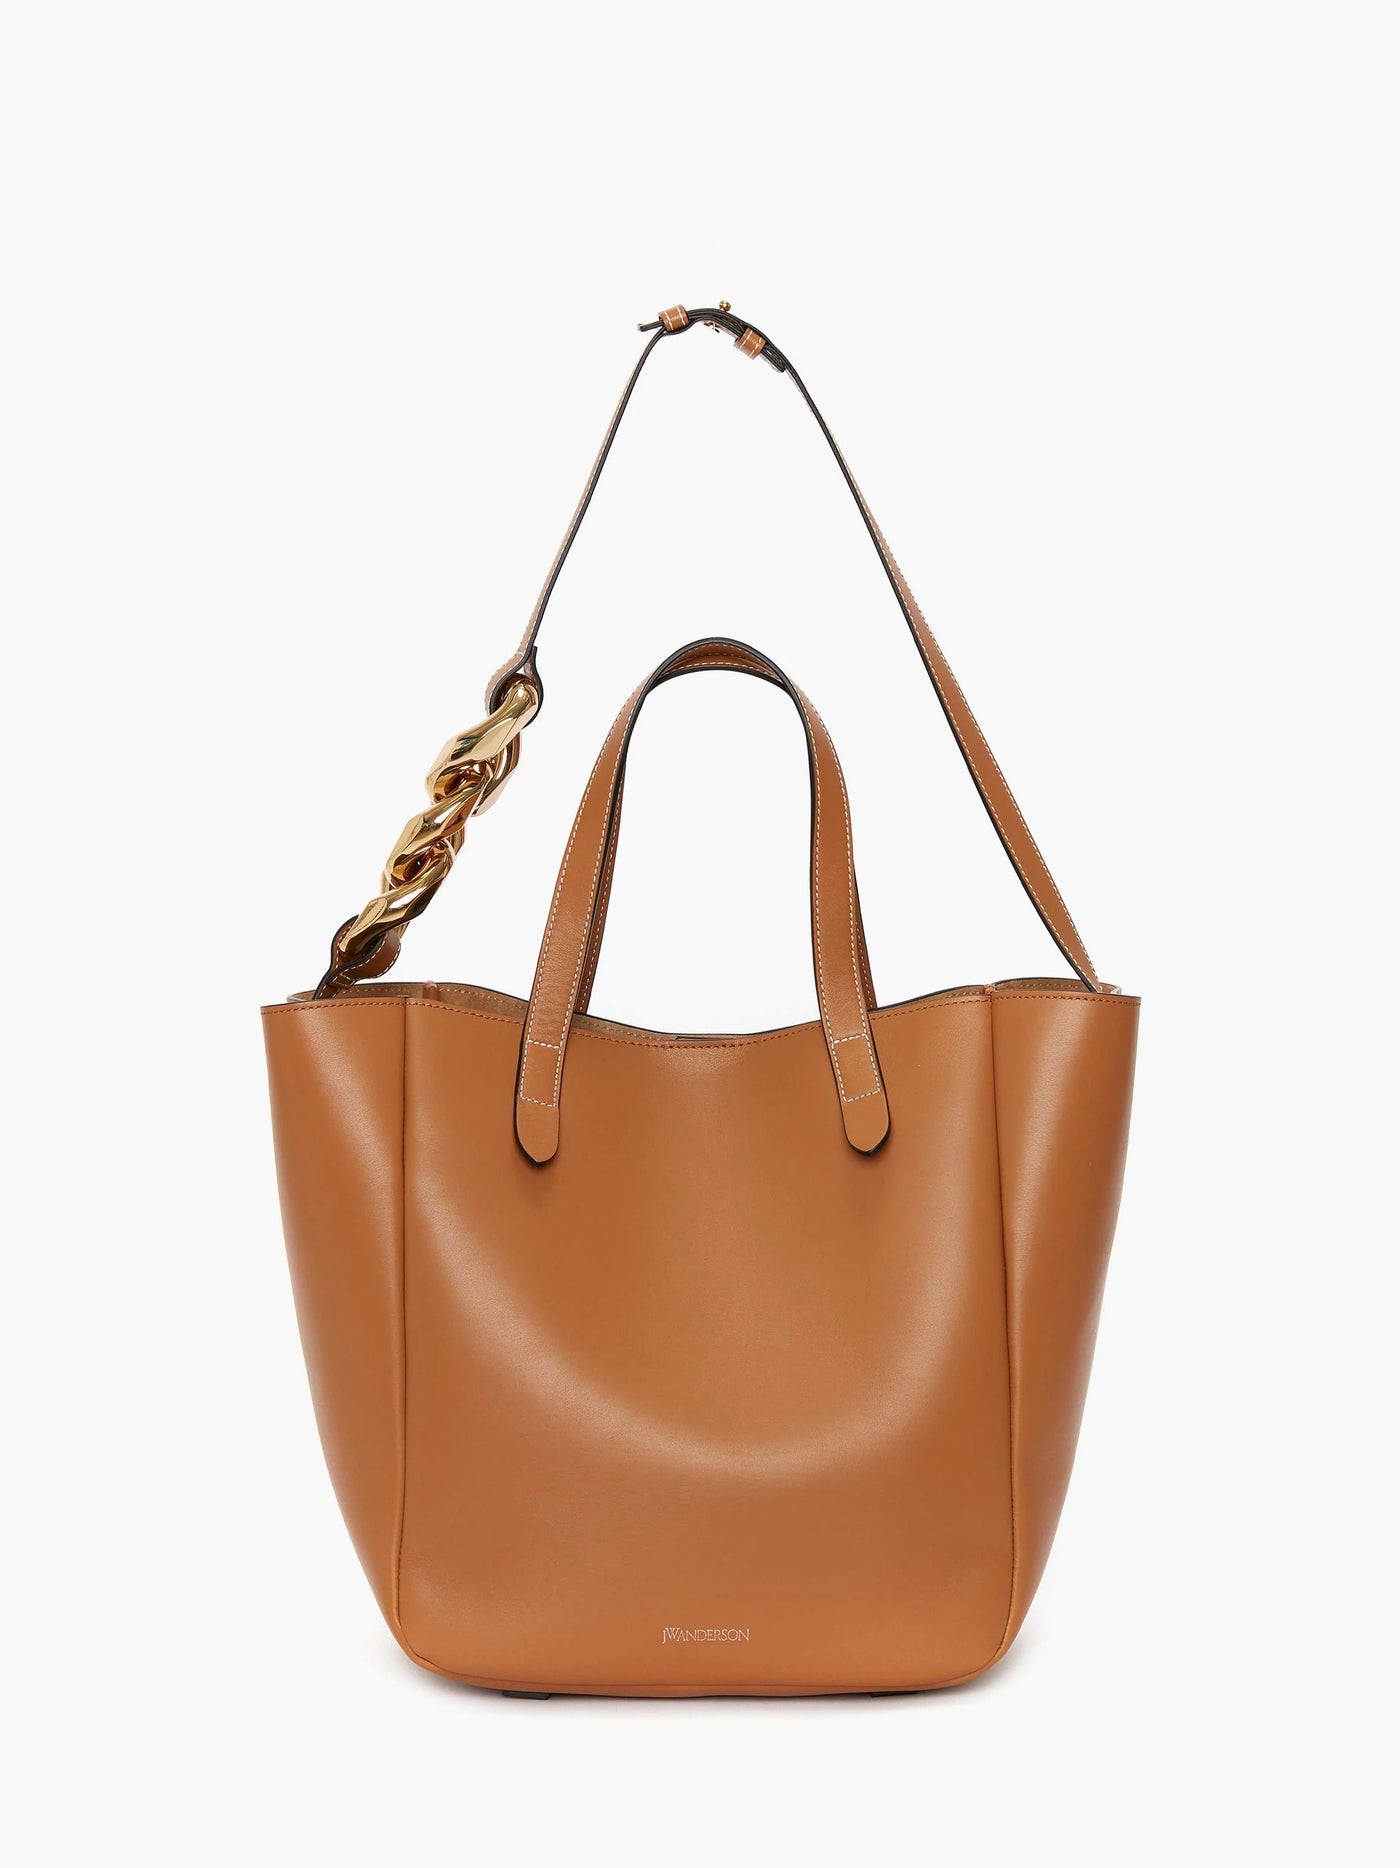 SMALL CHAIN LEATHER CABAS BAG - Pecan